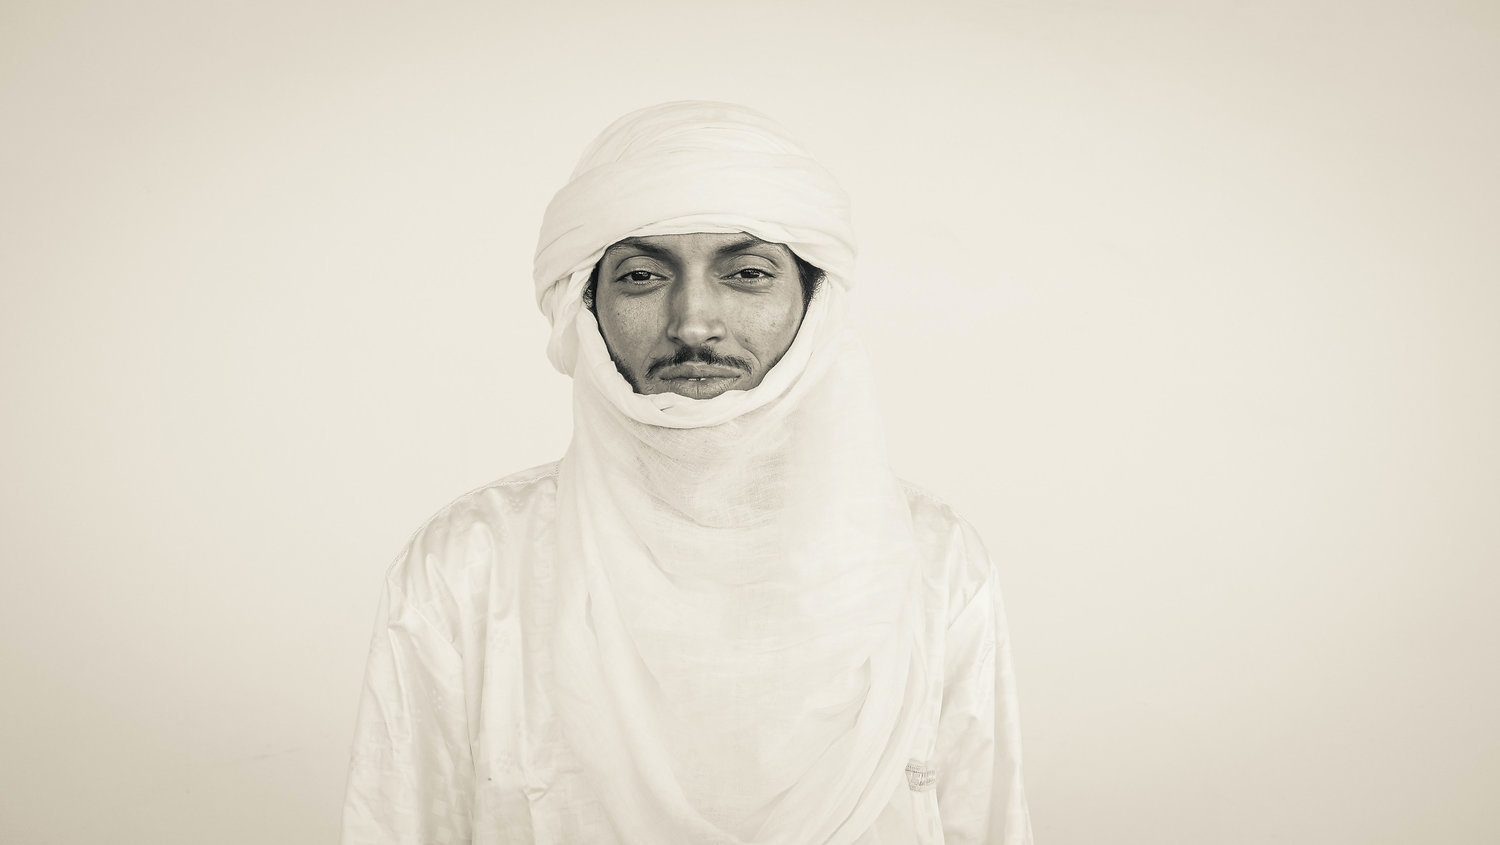 A man (Nigerien Musician Oumara Moctar/Bombino) dressed entirely in a white traditional Tuareg outfit and headdress against a white backdrop